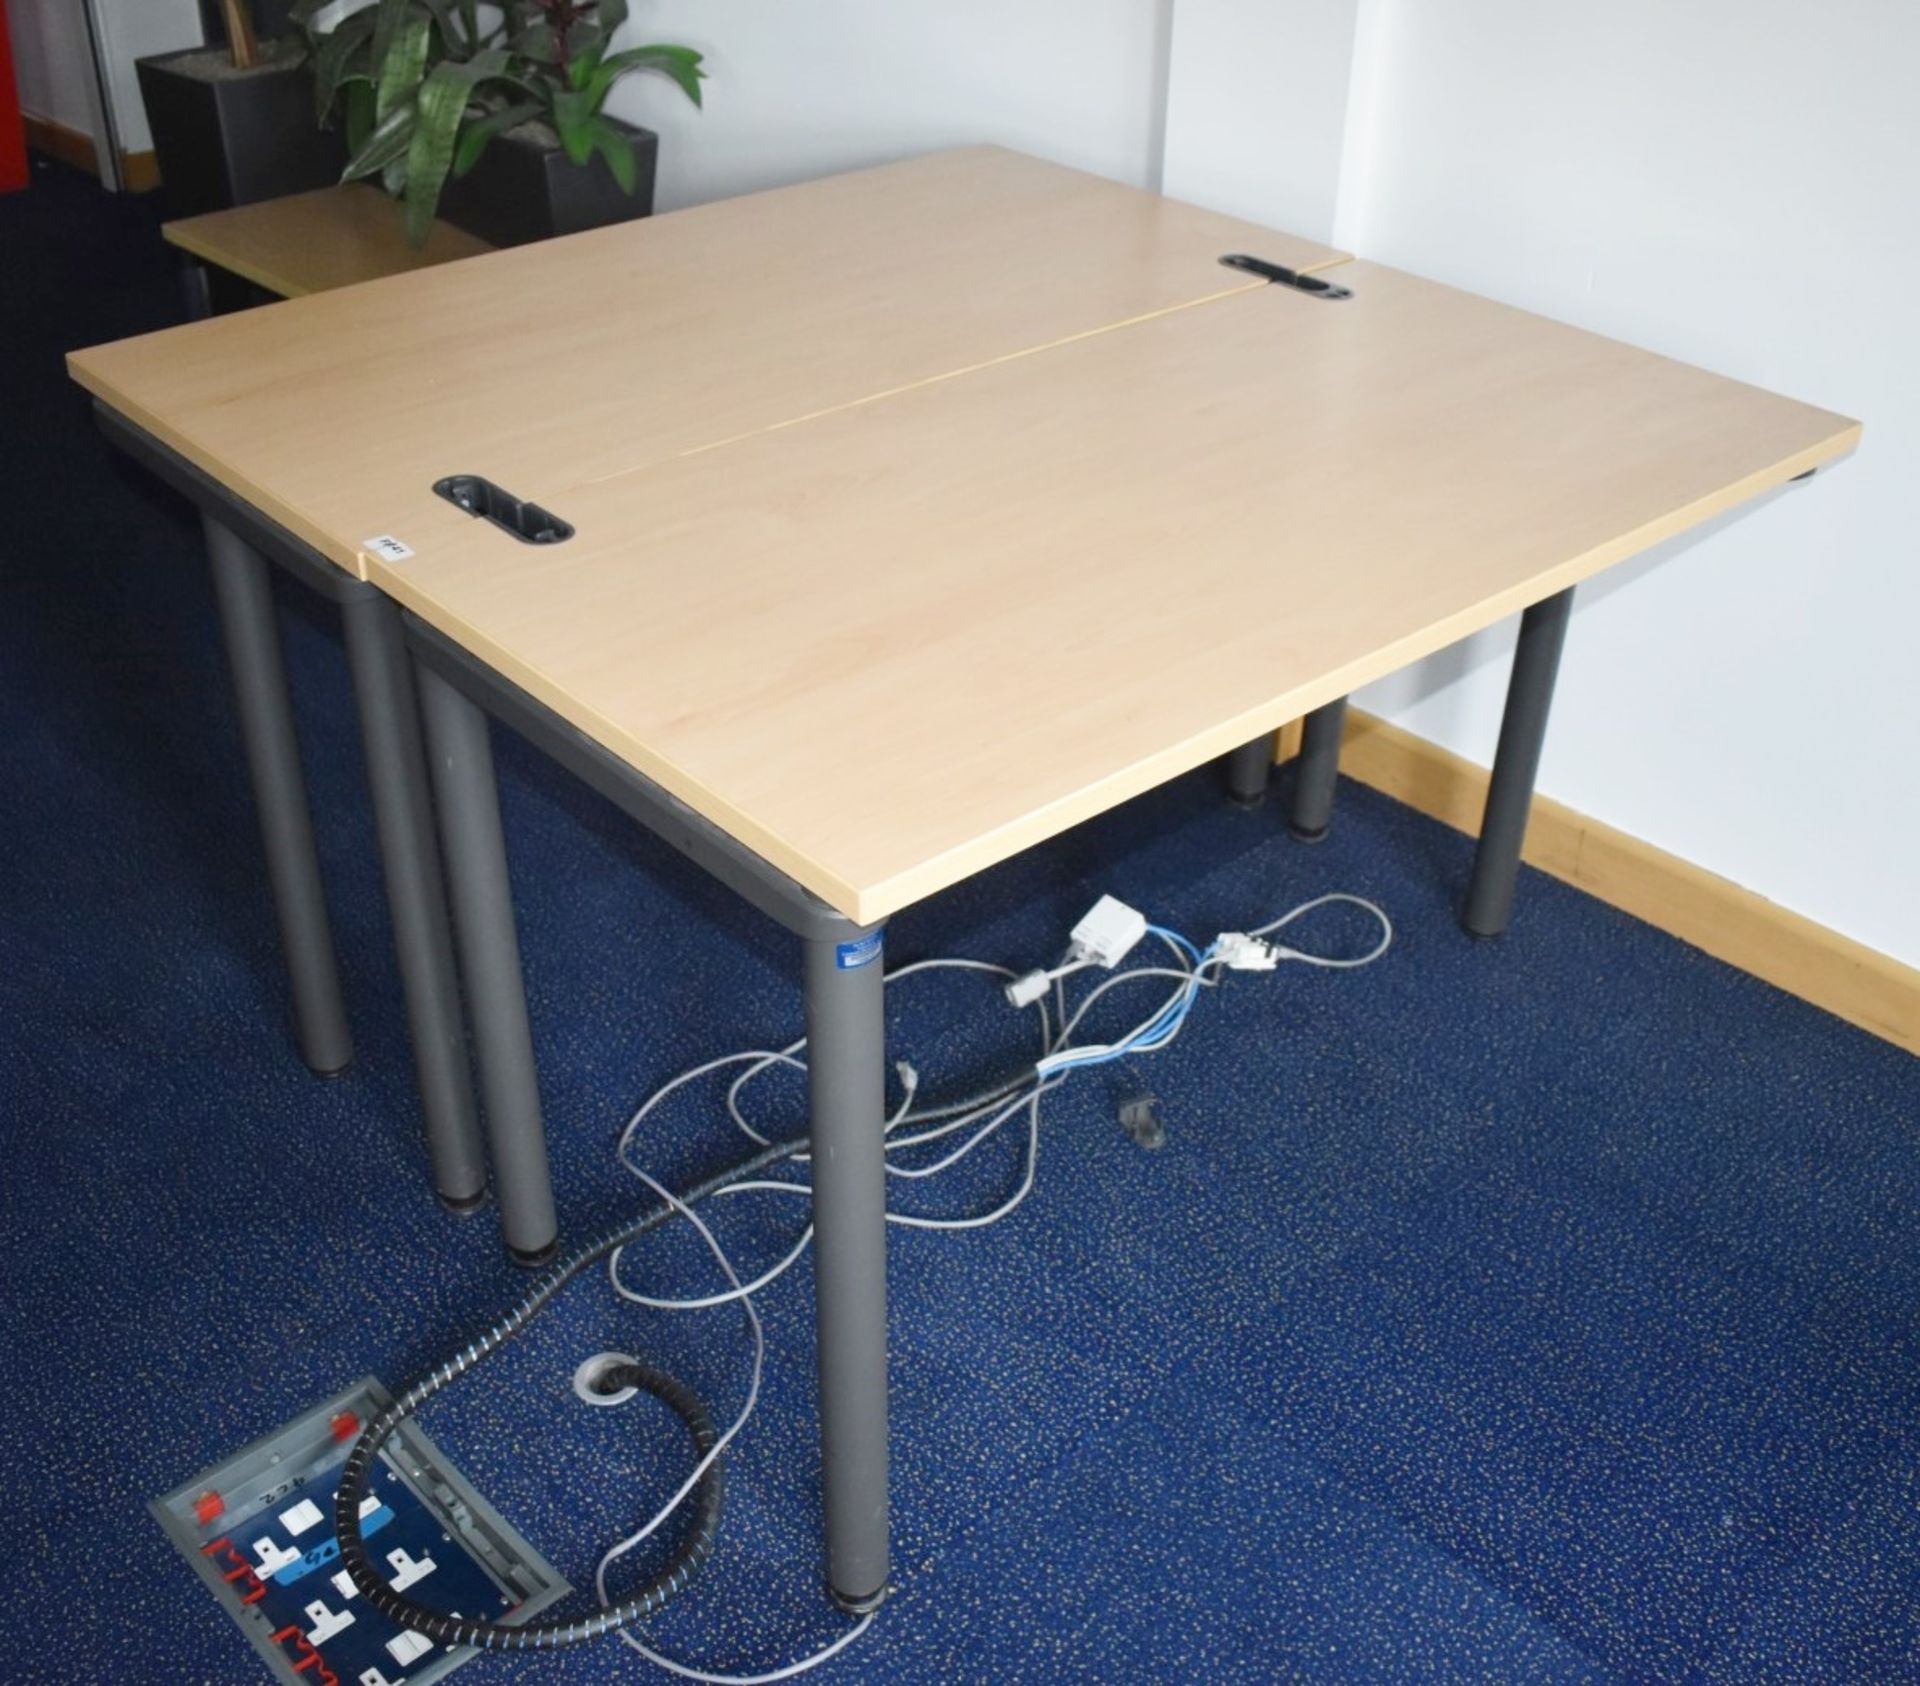 2 x Beech Office Desks With Metal Bases and Cable Tidy Inserts - H72 x W120 x D60 cms - Ref: FF141 U - Image 3 of 3